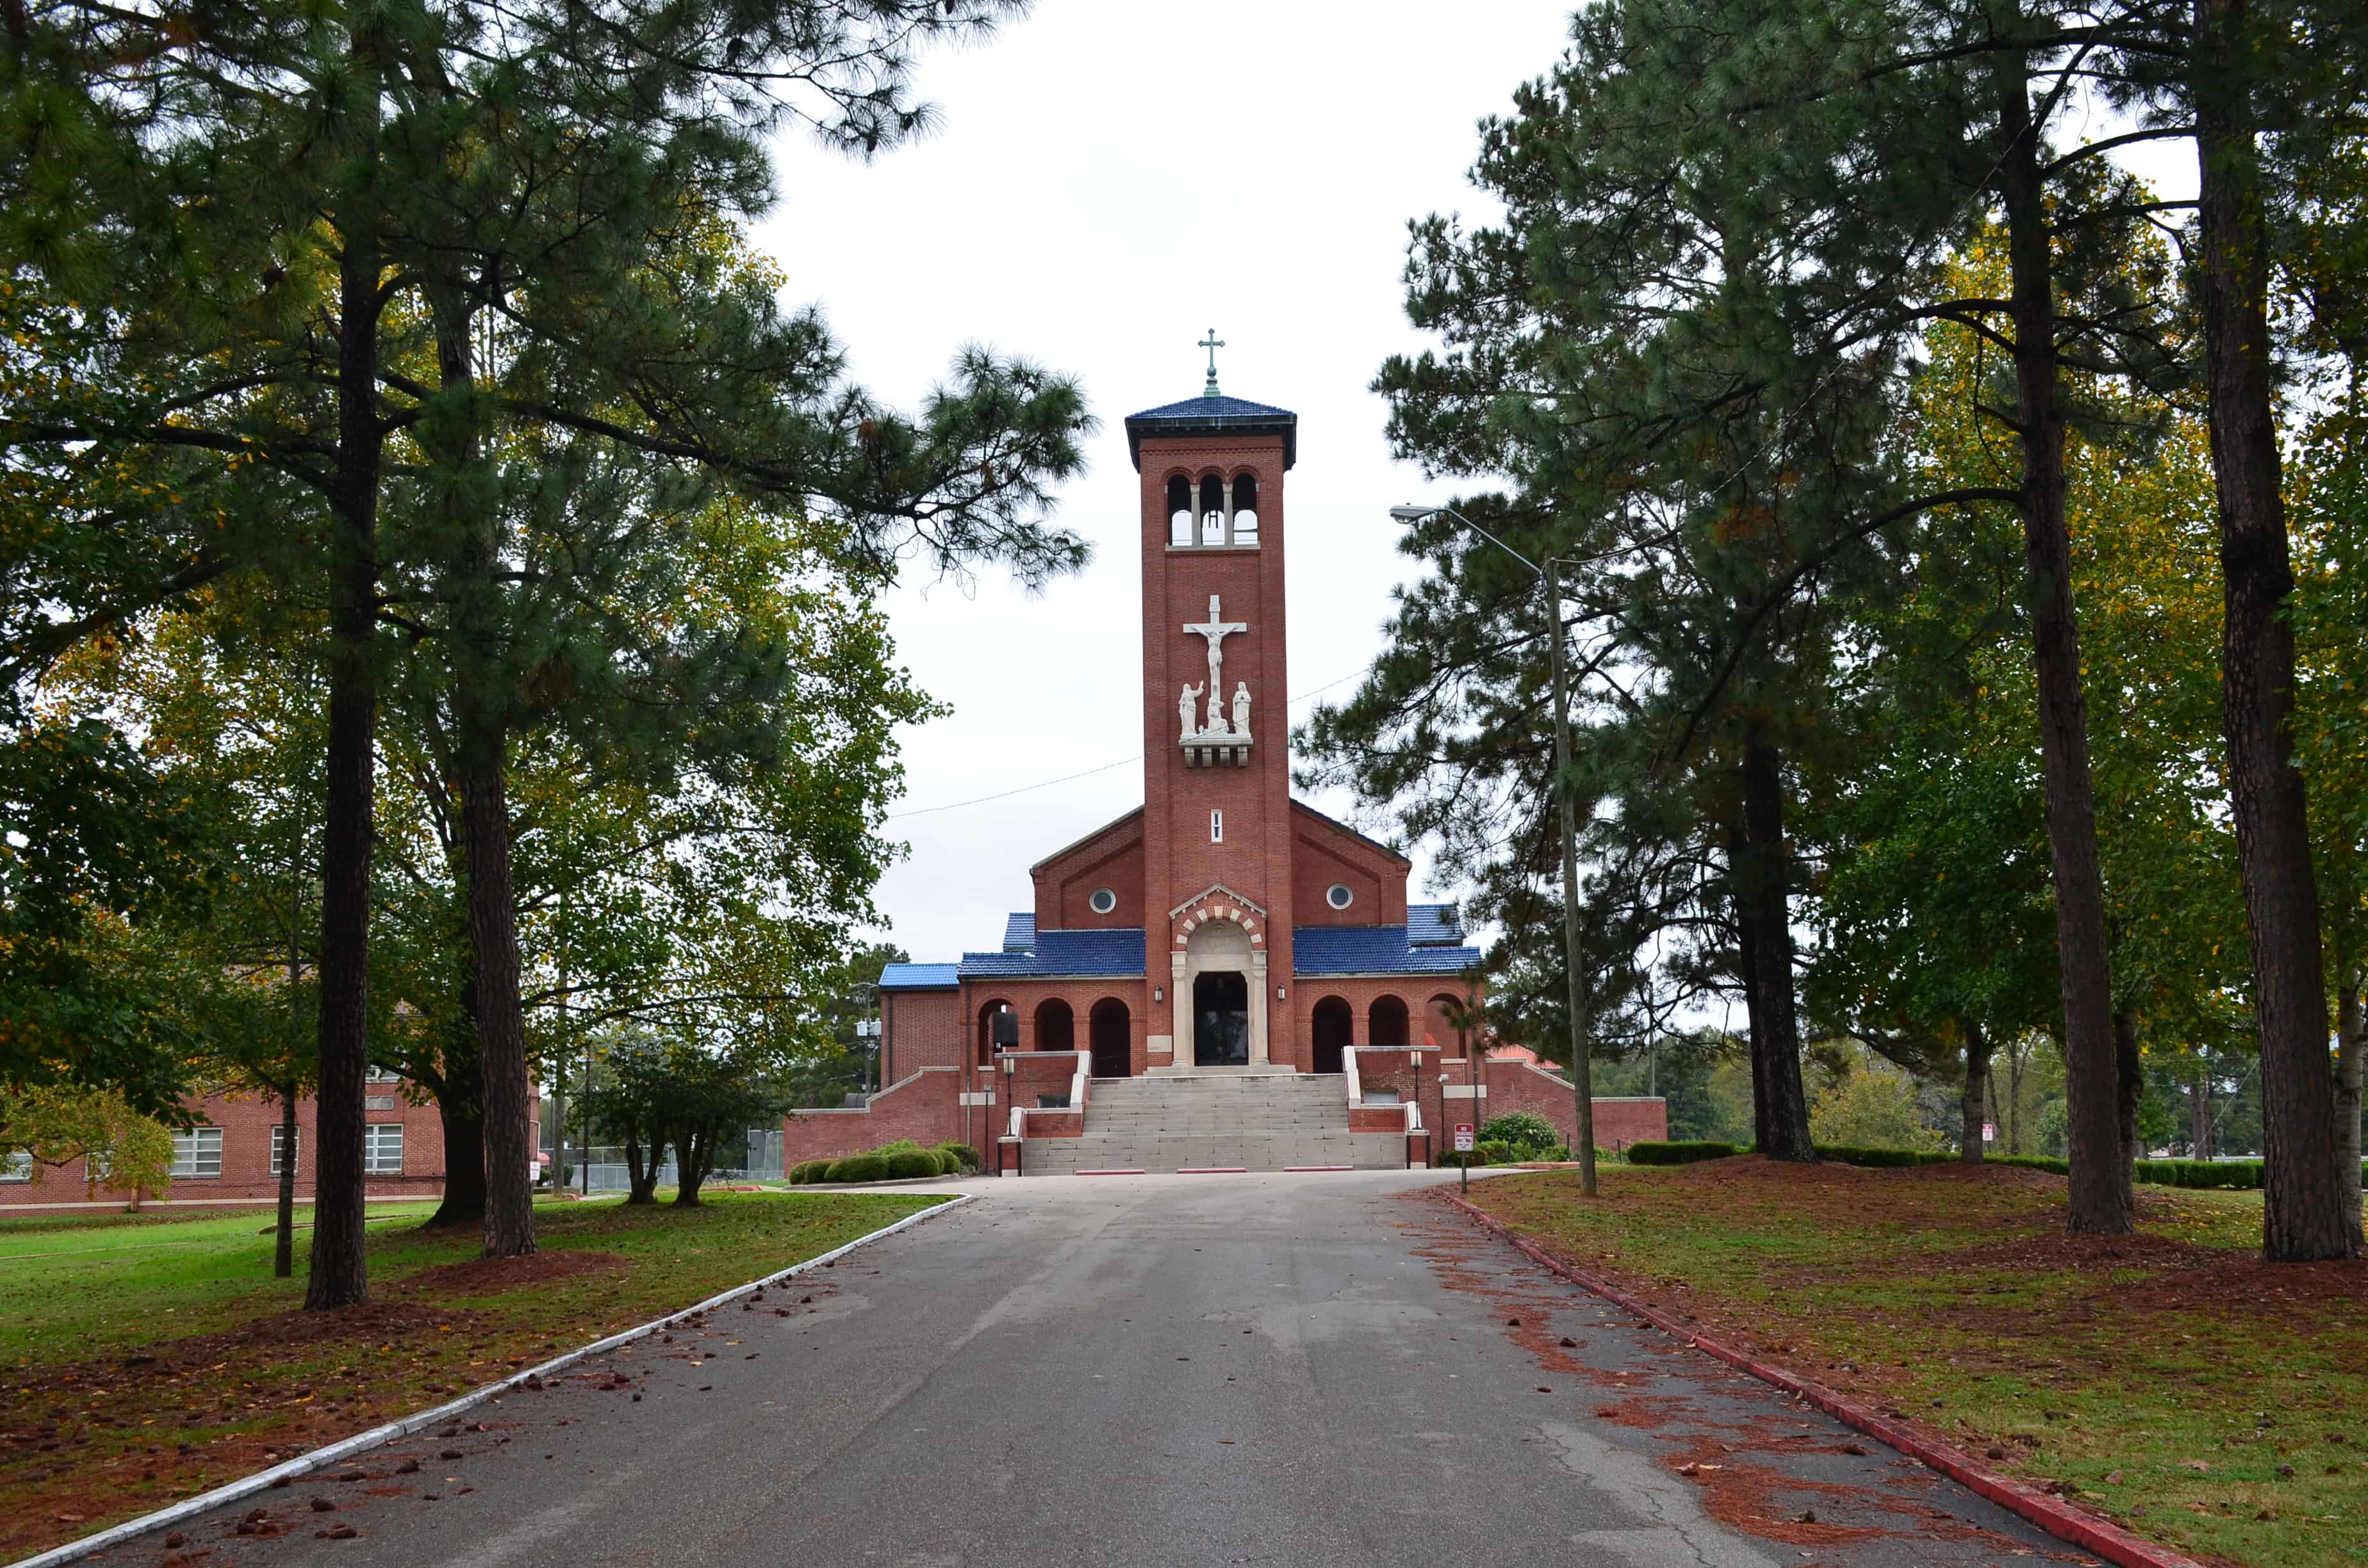 St. Jude Catholic Church on the Selma to Montgomery National Historic Trail in Alabama